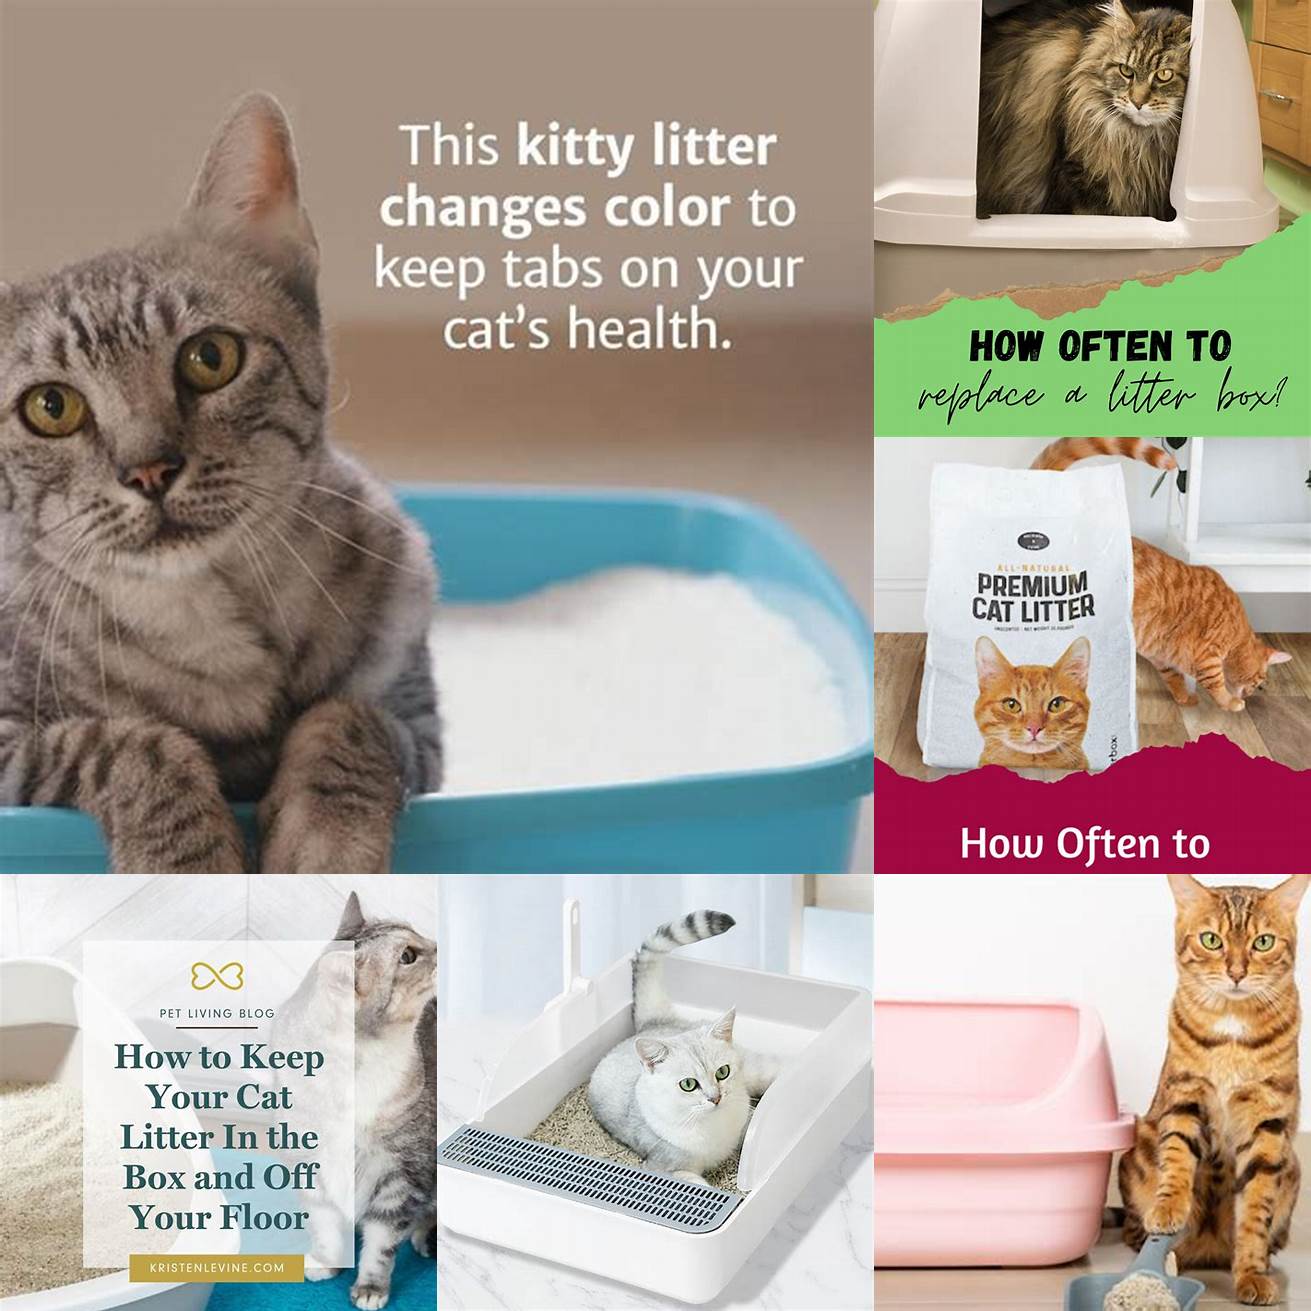 Replace the litter regularly